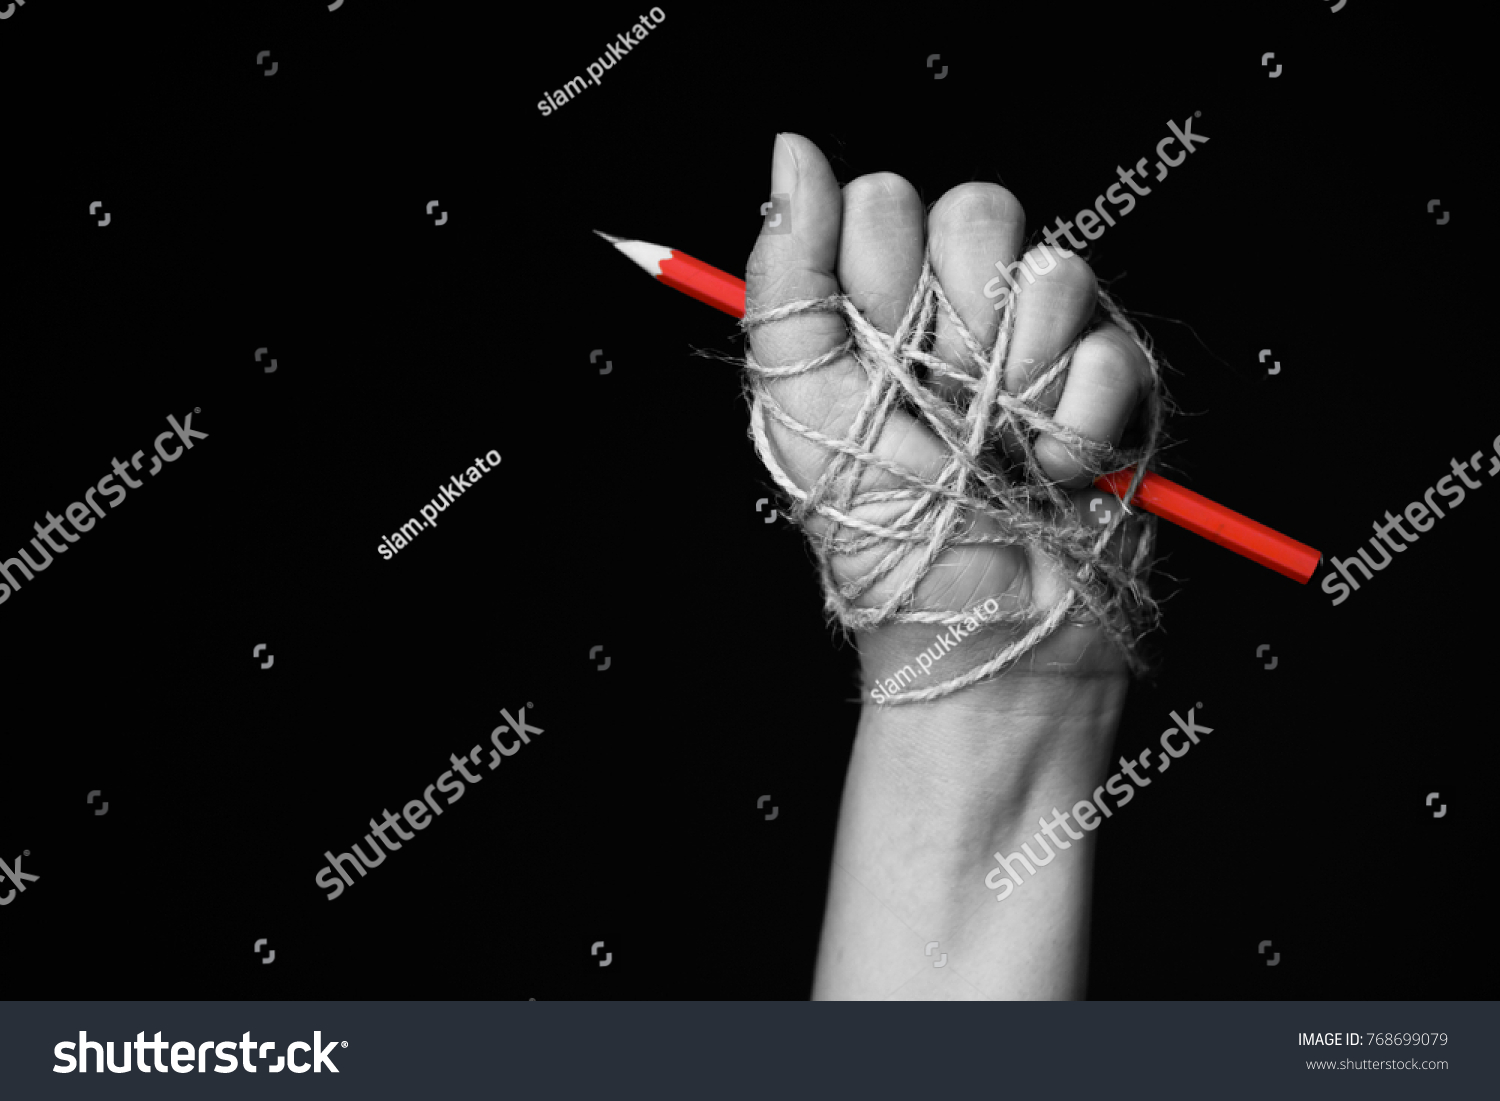 Hand with red pencil tied with rope, depicting the idea of freedom of the press or freedom of expression on dark background in low key. international human rights day concept. #768699079